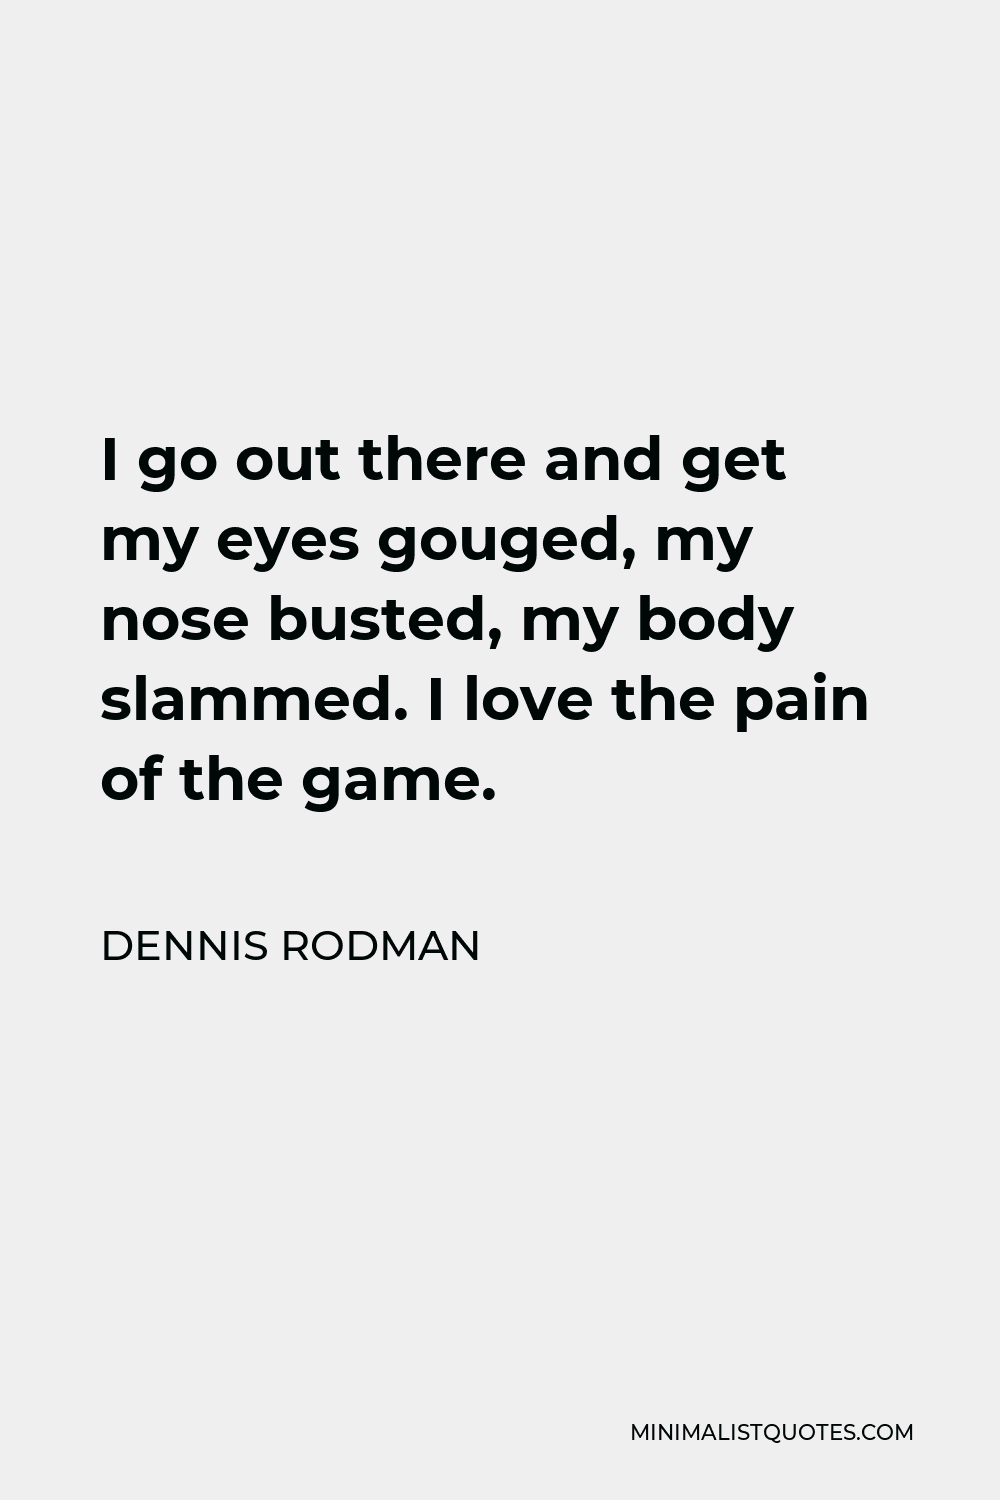 Dennis Rodman Quote - I go out there and get my eyes gouged, my nose busted, my body slammed. I love the pain of the game.